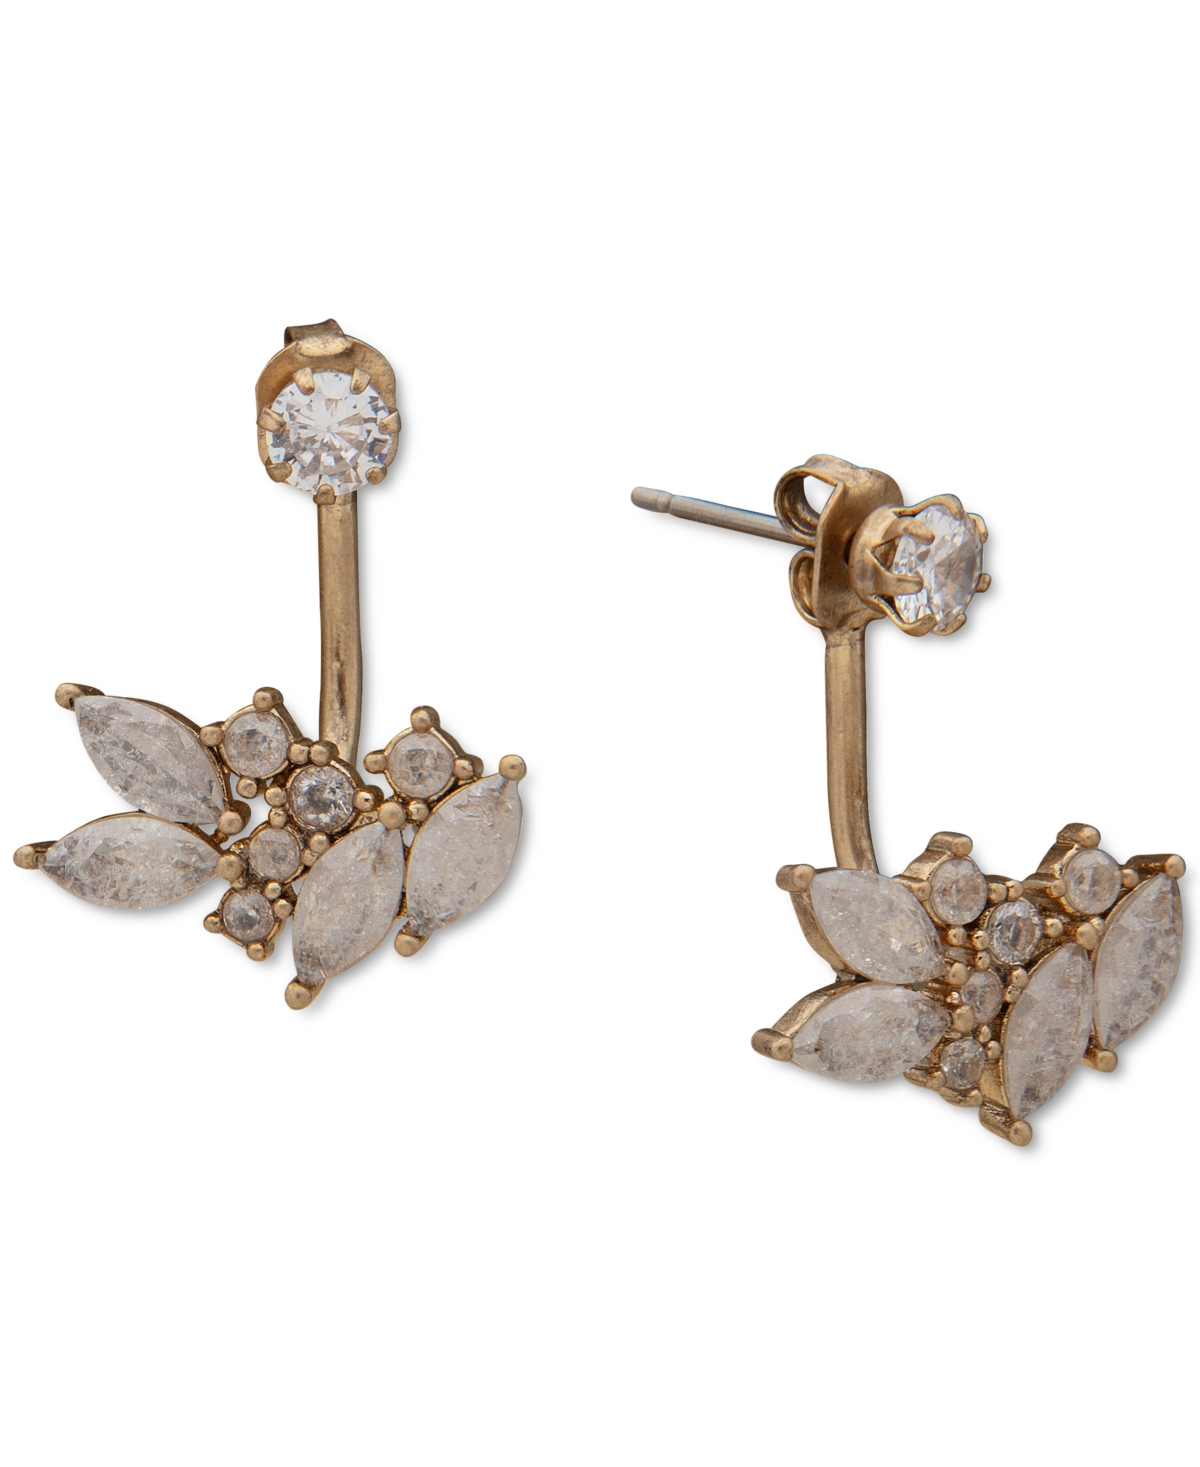 Gold-Tone Crackled Cubic Zirconia Jacket Earrings - Gold